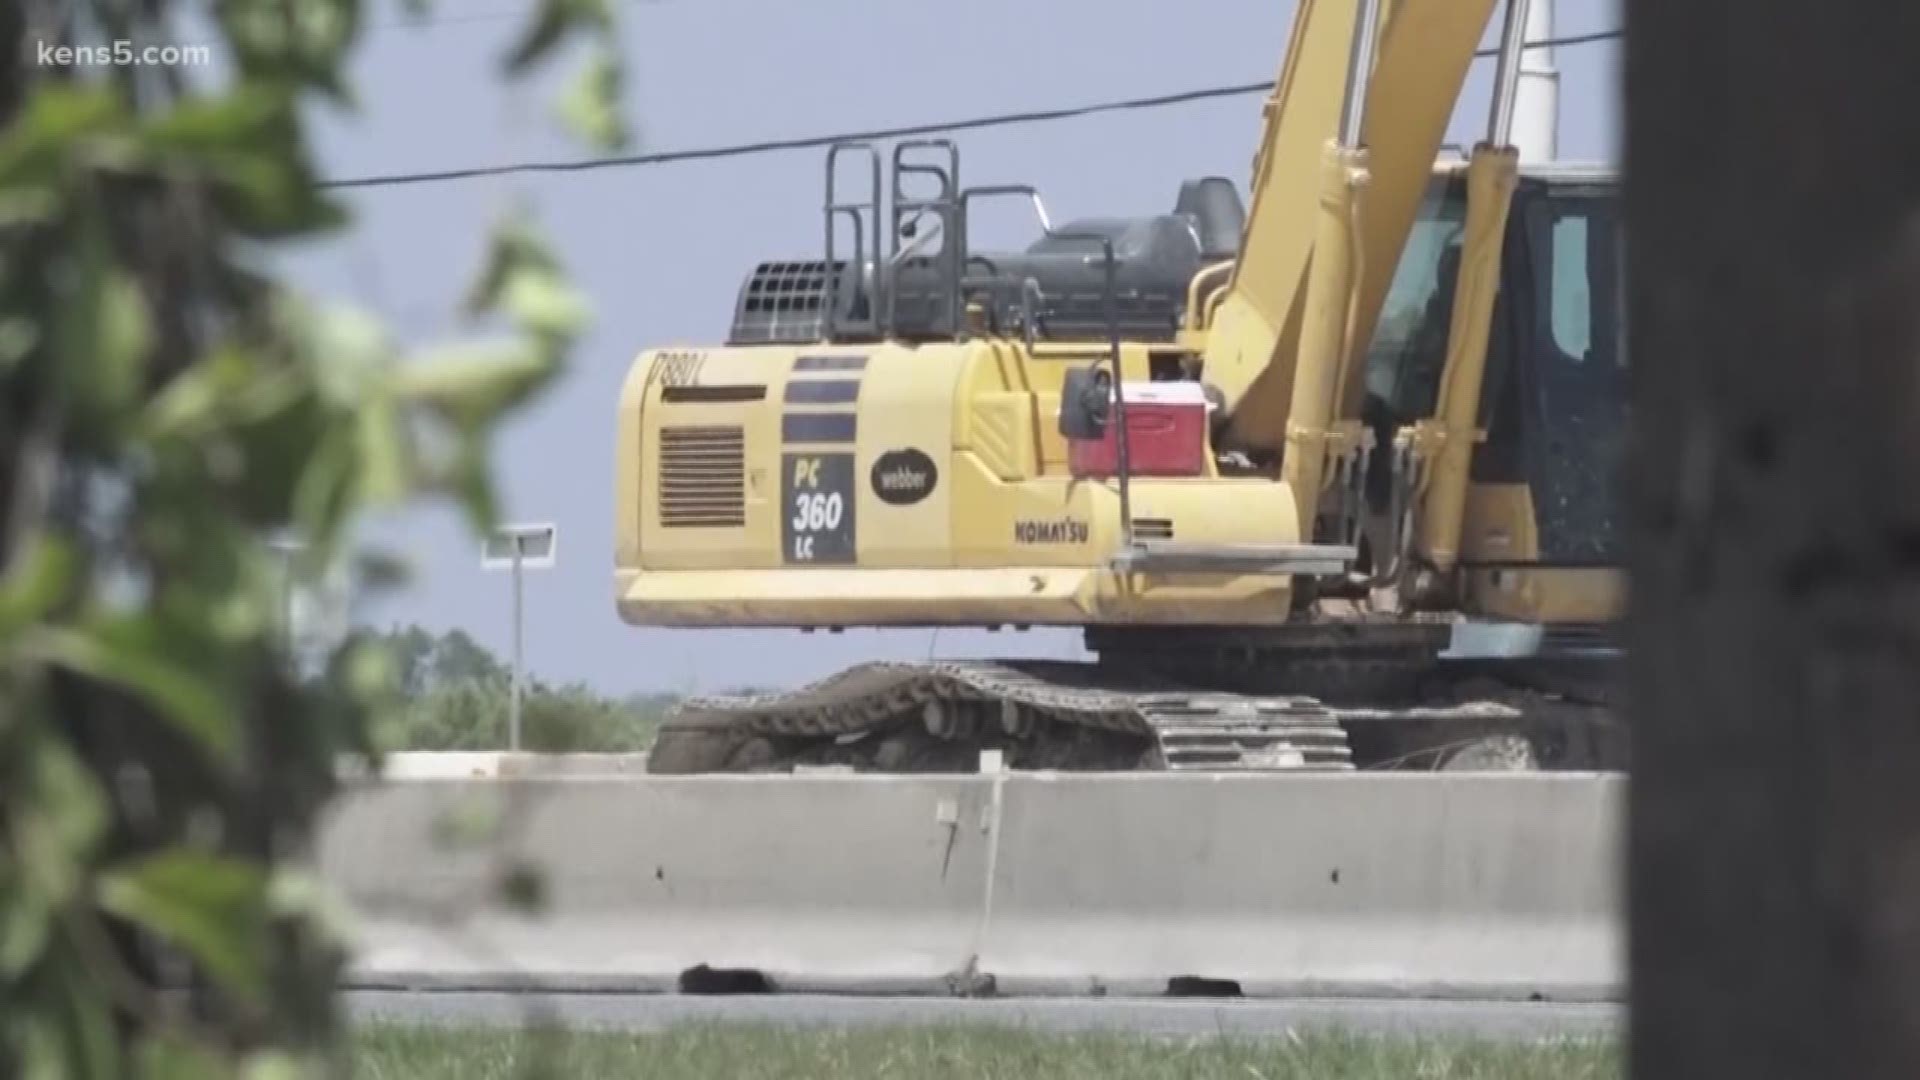 Transportation crews say a stretch of the road in northeast San Antonio will be undergoing major renovations, turning a rural highway into a full-fledged freeway.